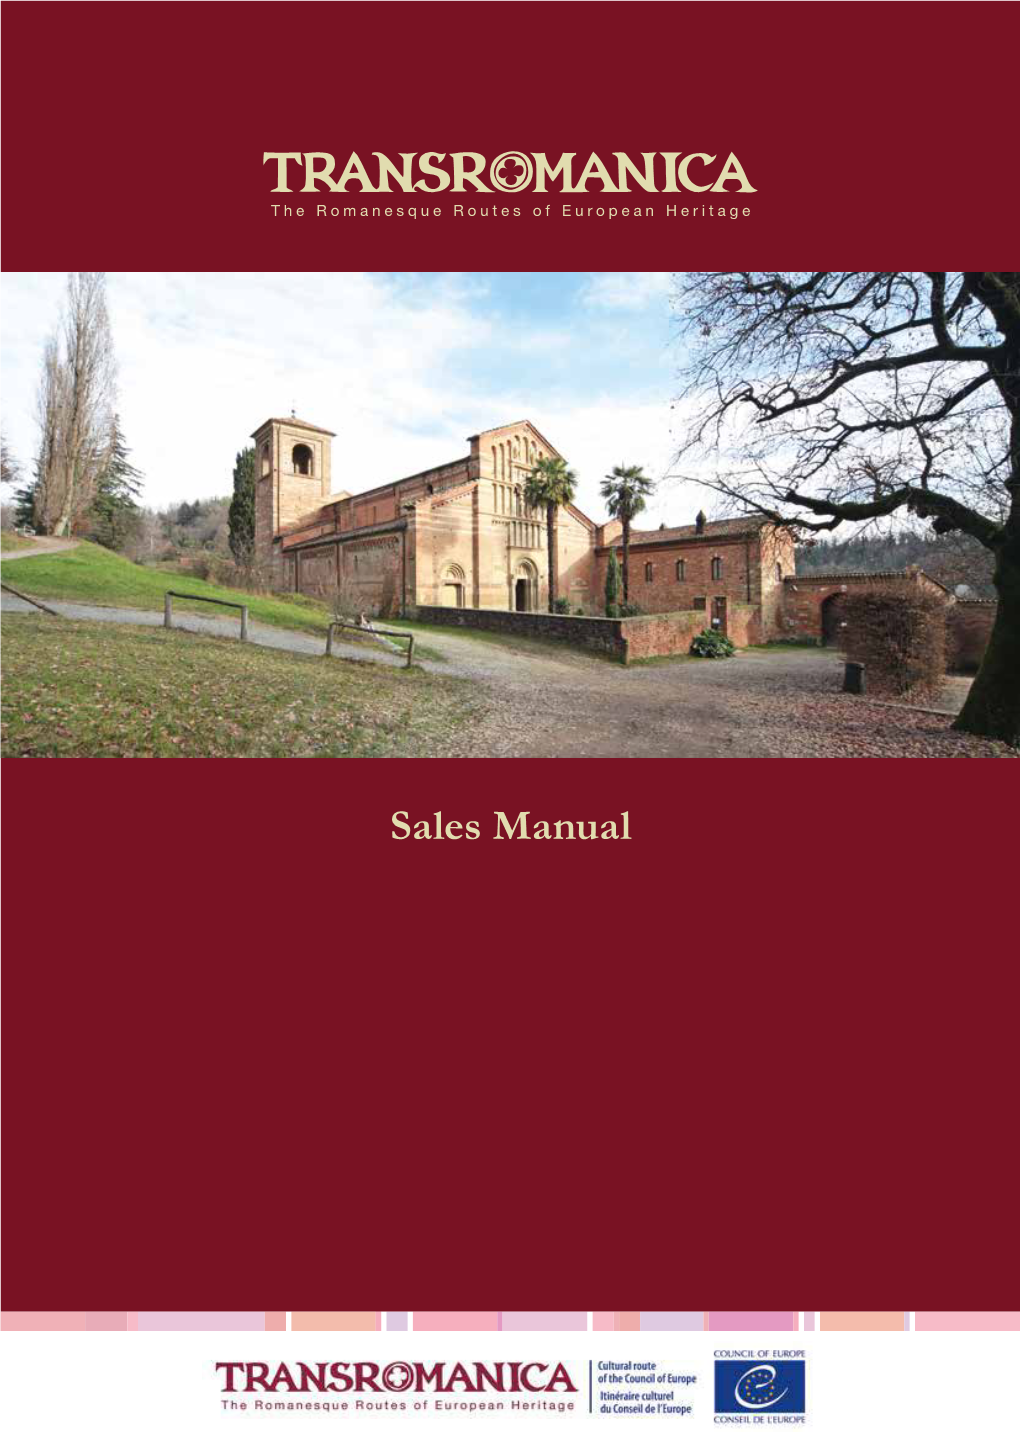 Sales Manual 2 3 WELCOME to TRANSROMANICA the ROMANESQUE ROUTES of EUROPEAN HERITAGE